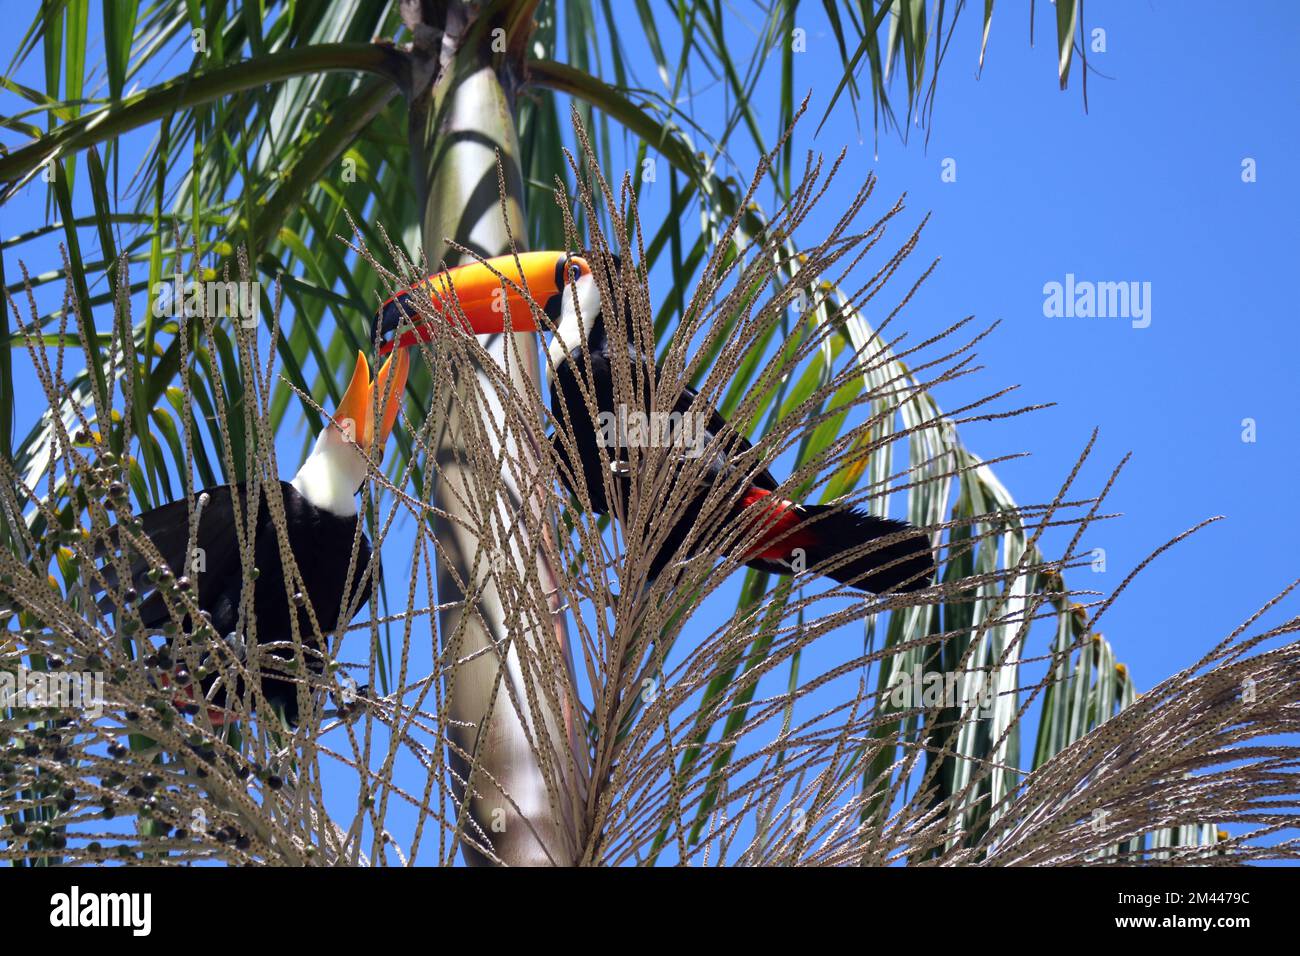 Ramphastos toco, or Toucans, on a Jussara Palm, Euterpe edulis, in Brazil. Stock Photo